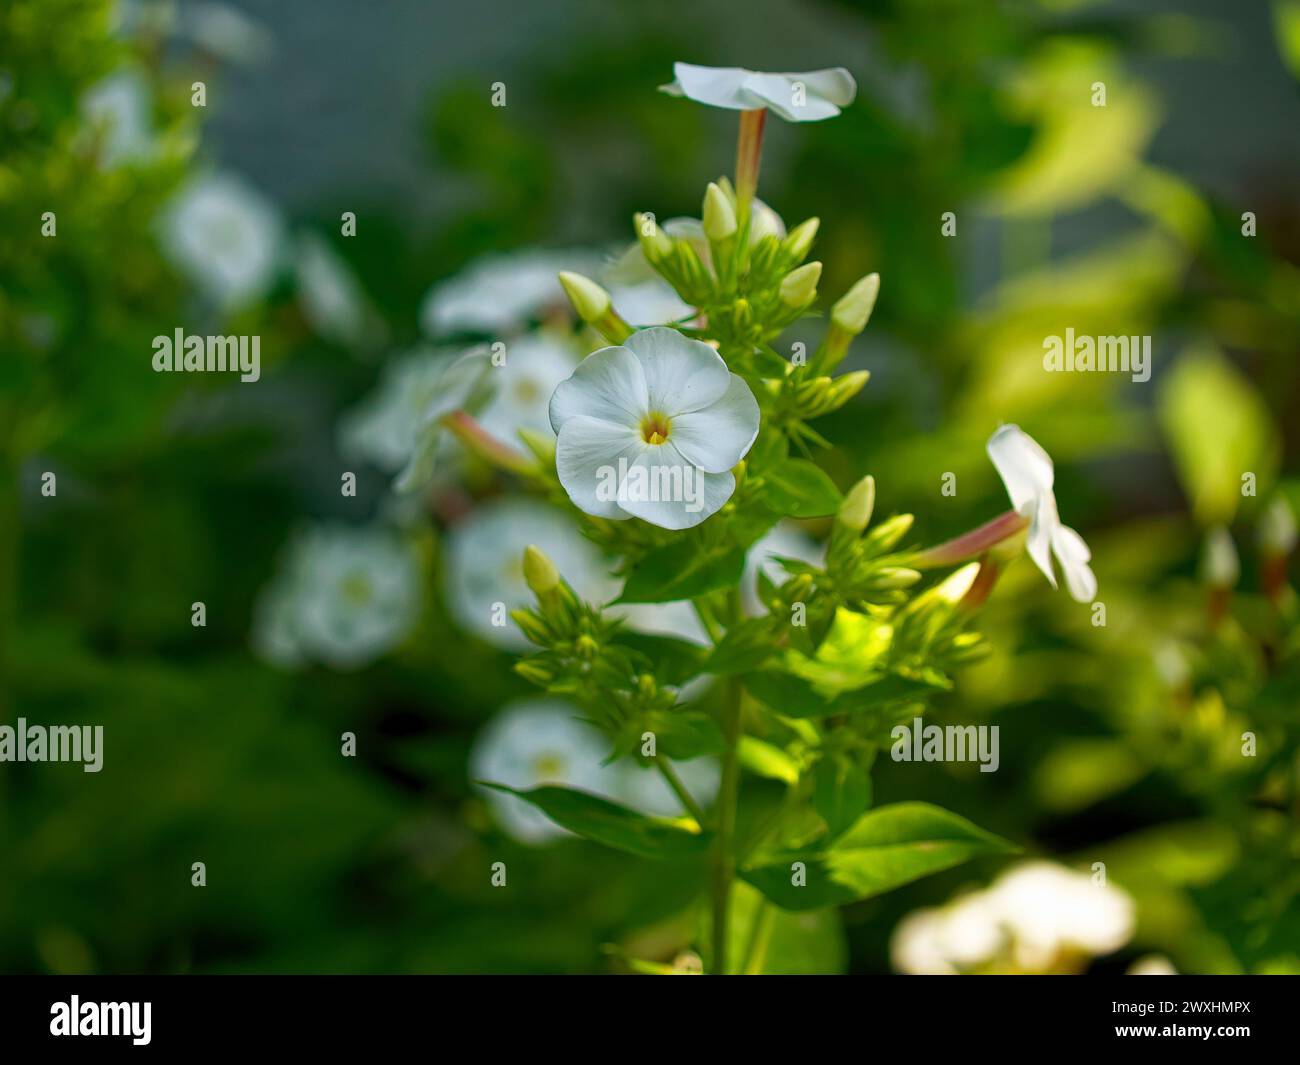 A close-up view of white flowers, their petals and centers in sharp focus against a backdrop of greenery. Stock Photo